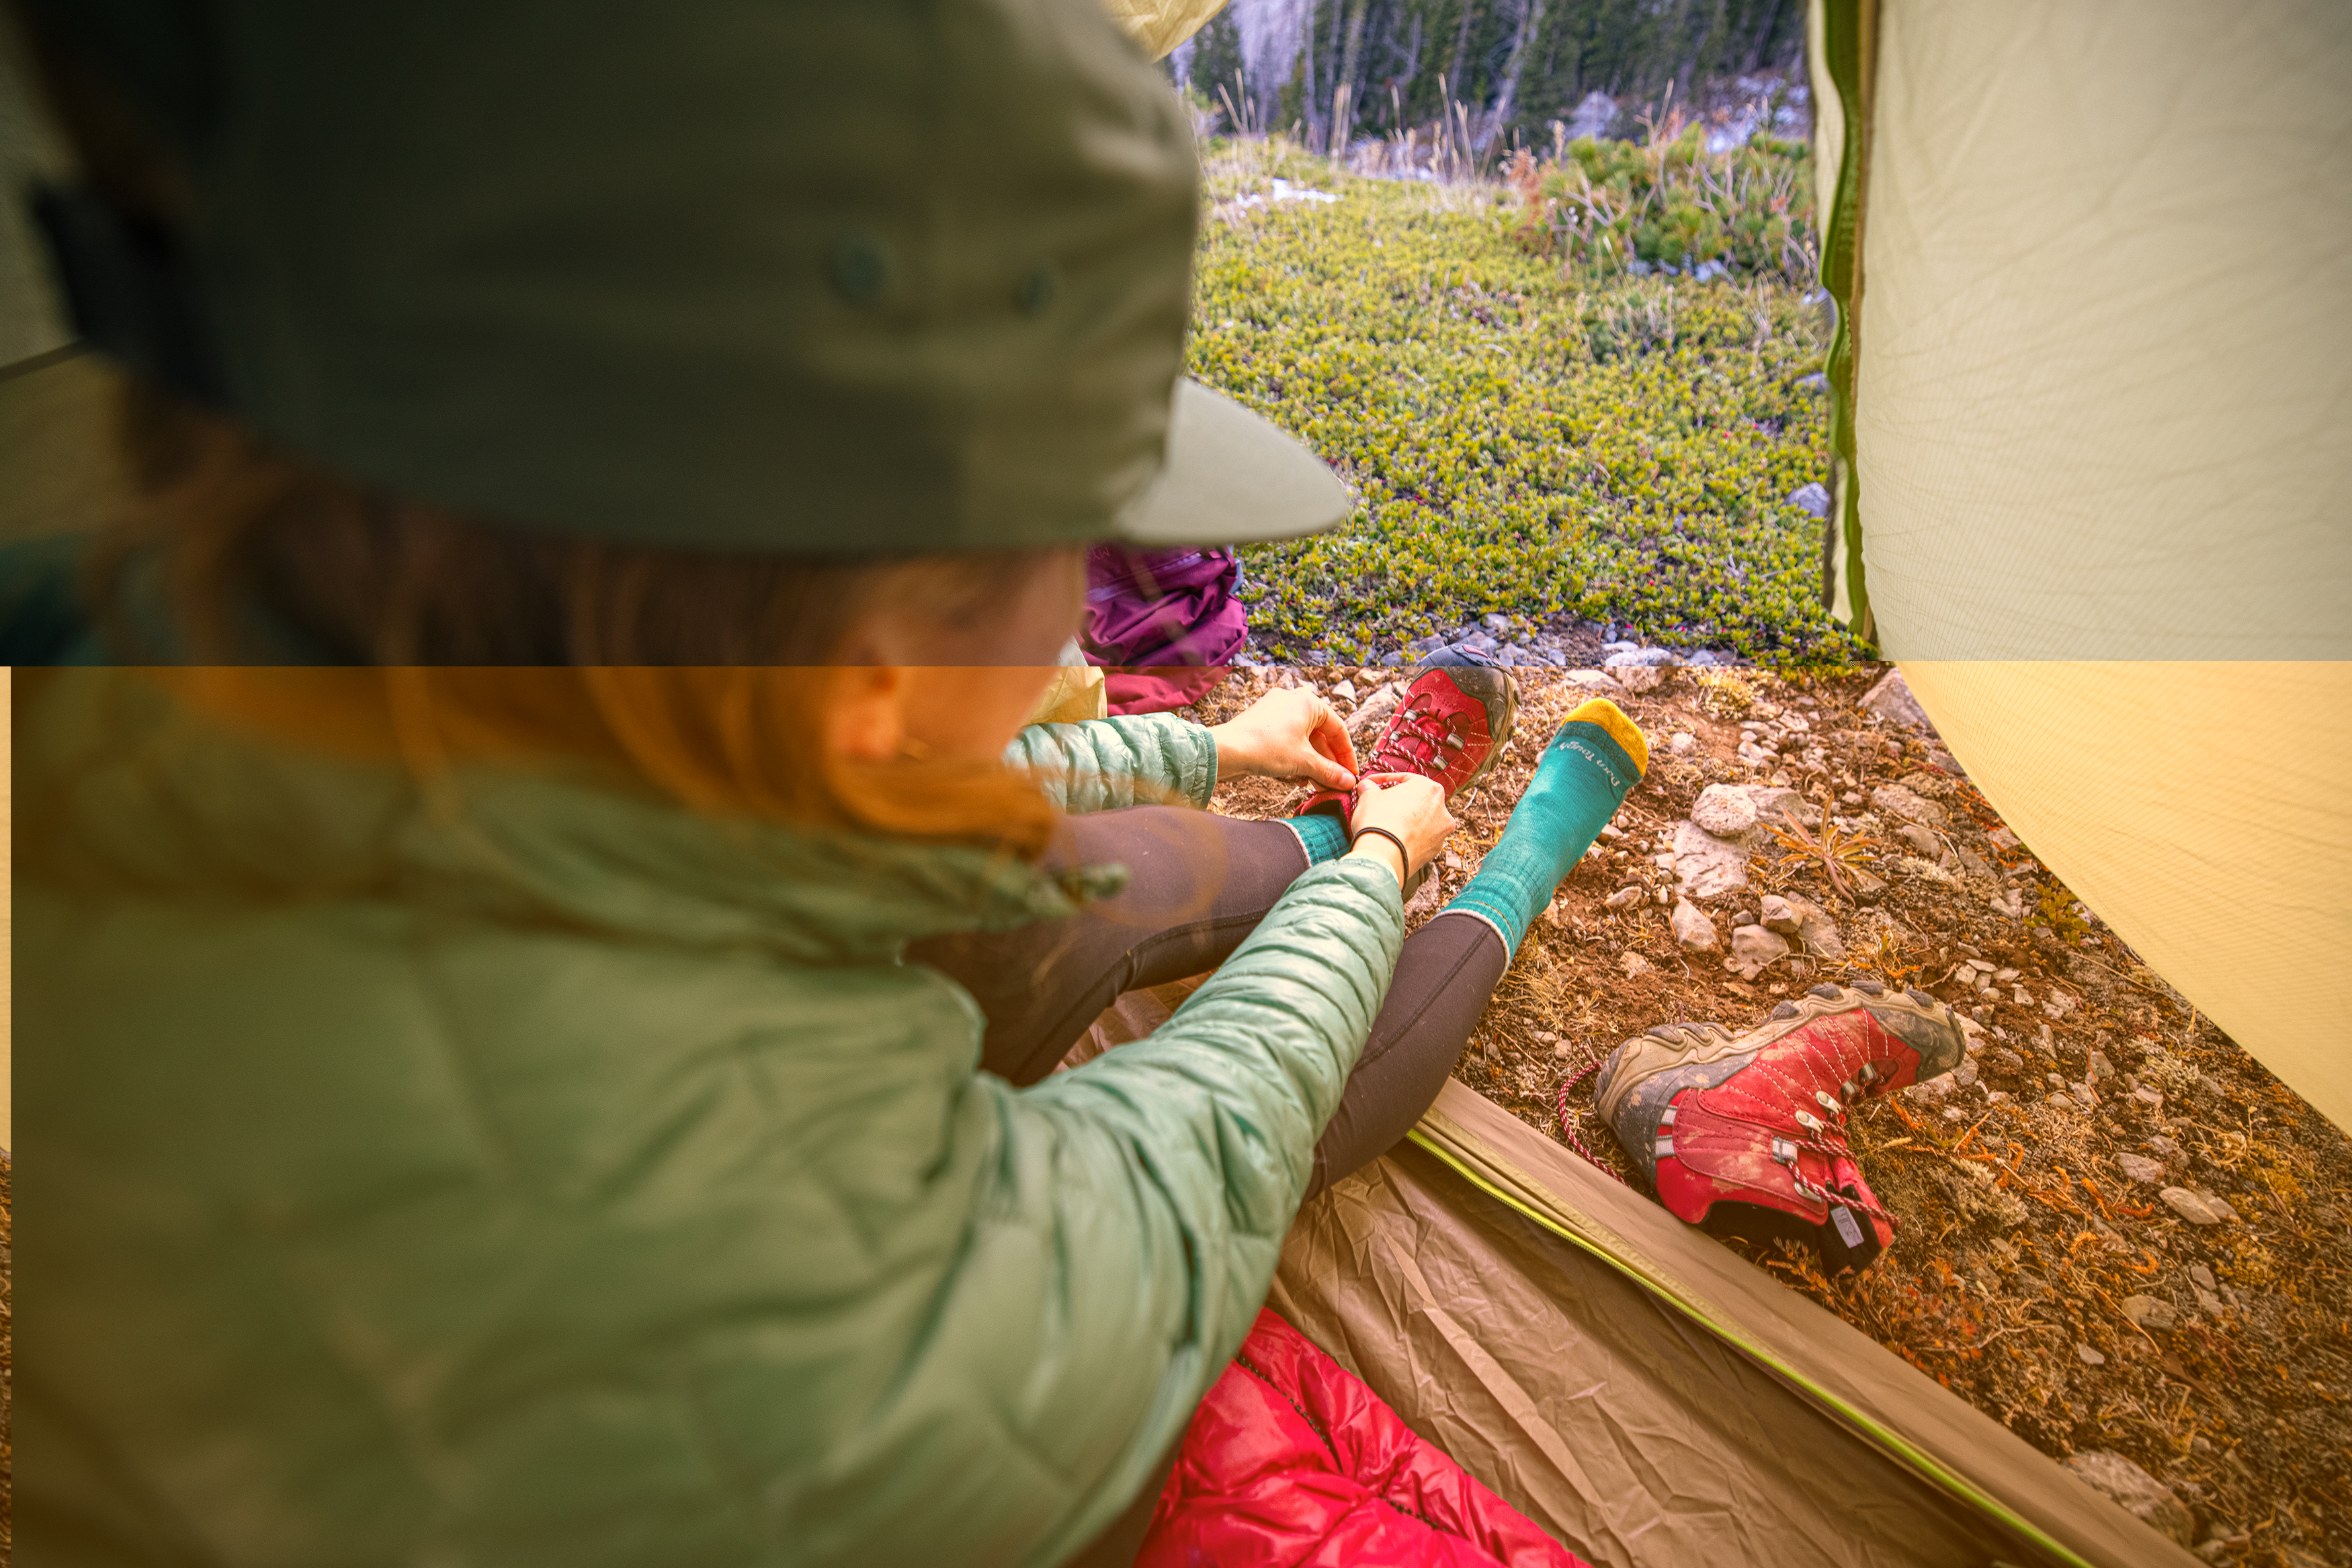 Keeping her feet warm and dry in the Rio Red Bridger Mid Waterproof while camping